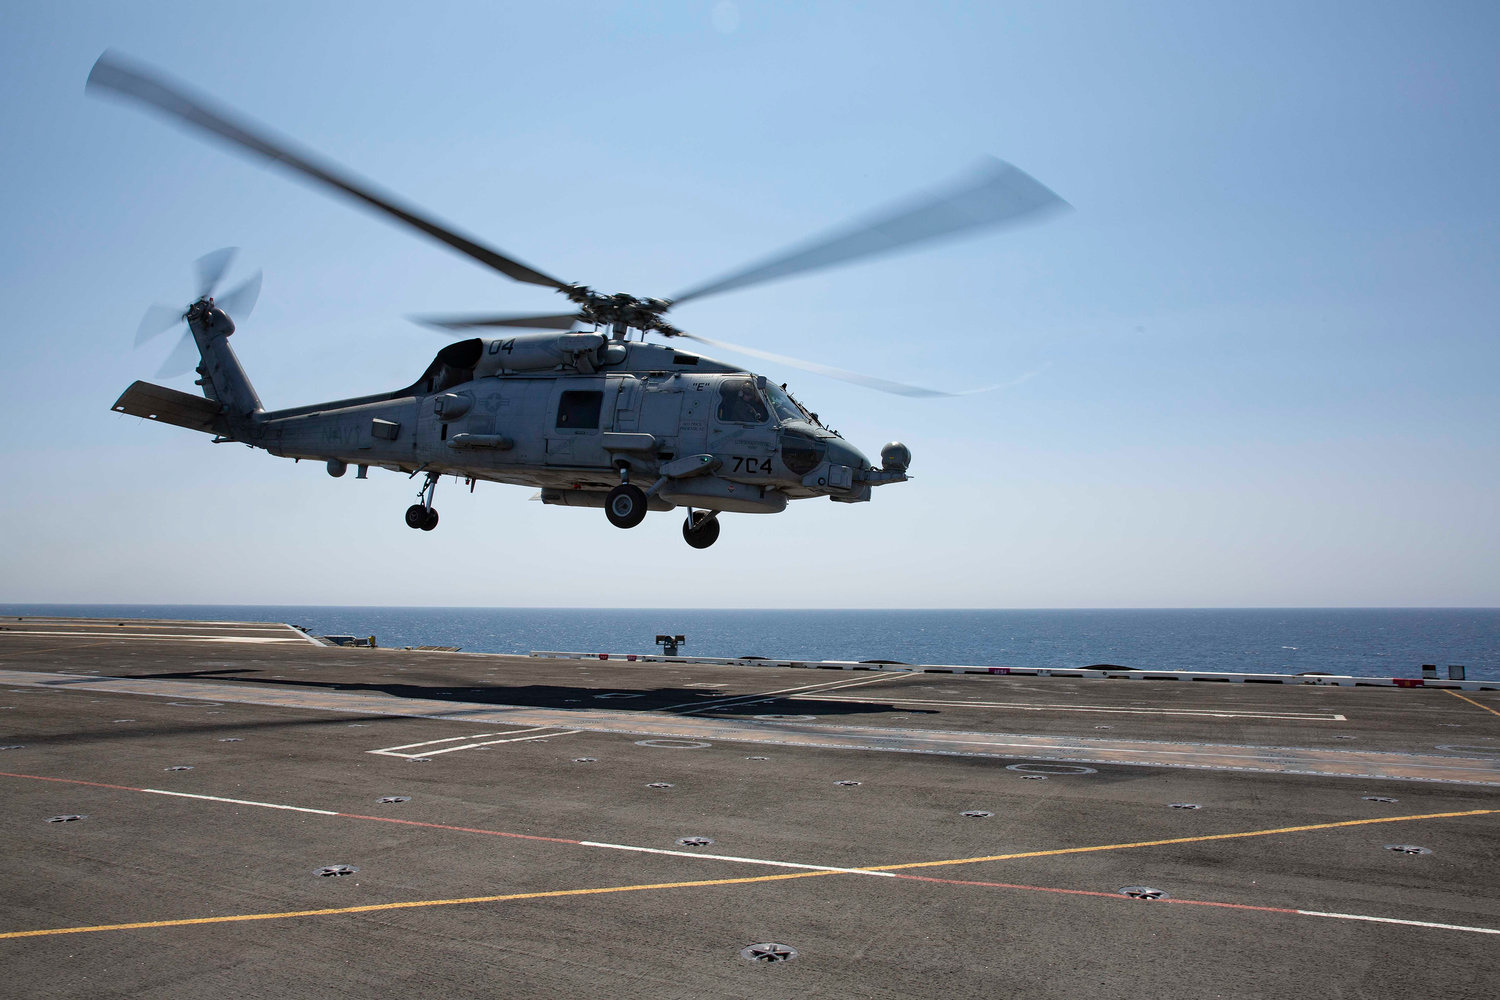 An MH-60R Sea Hawk helicopter, assigned to the "Raptors" of Helicopter Maritime Strike Squadron (HSM) 71, takes off of the flight deck of the aircraft carrier USS Abraham Lincoln. A similar Navy helicopter operating from the ship crashed off the coast of San Diego on Aug. 31, 2021. (Petty Officer 2nd Class Amber Smalley/U.S. Navy/TNS)